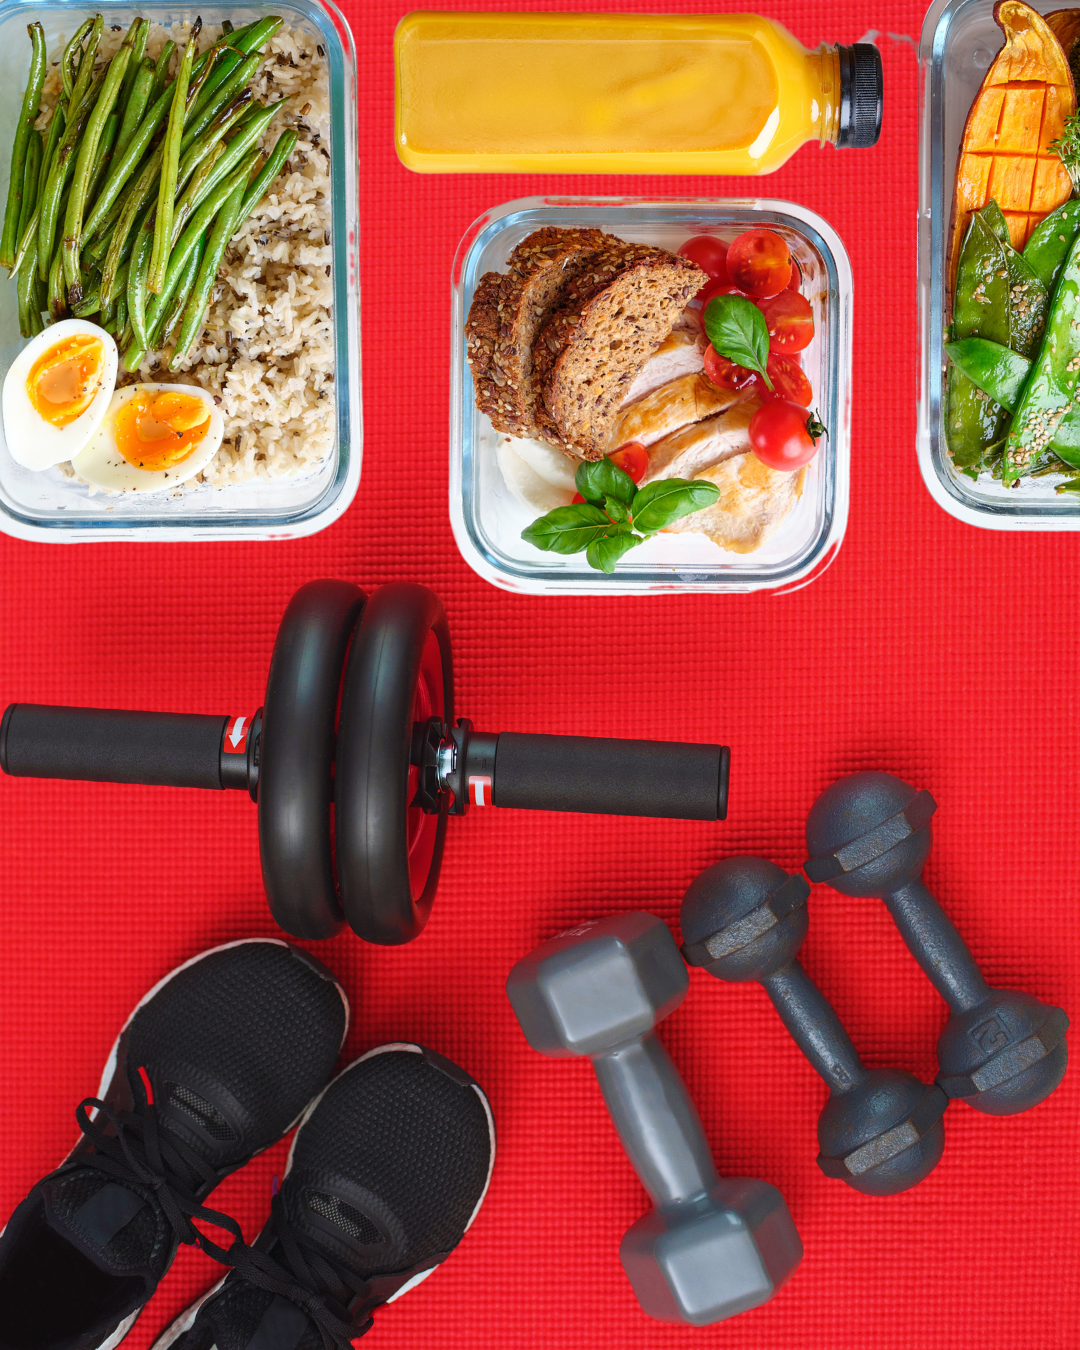 Meal plans in glass containers and fitness equipment